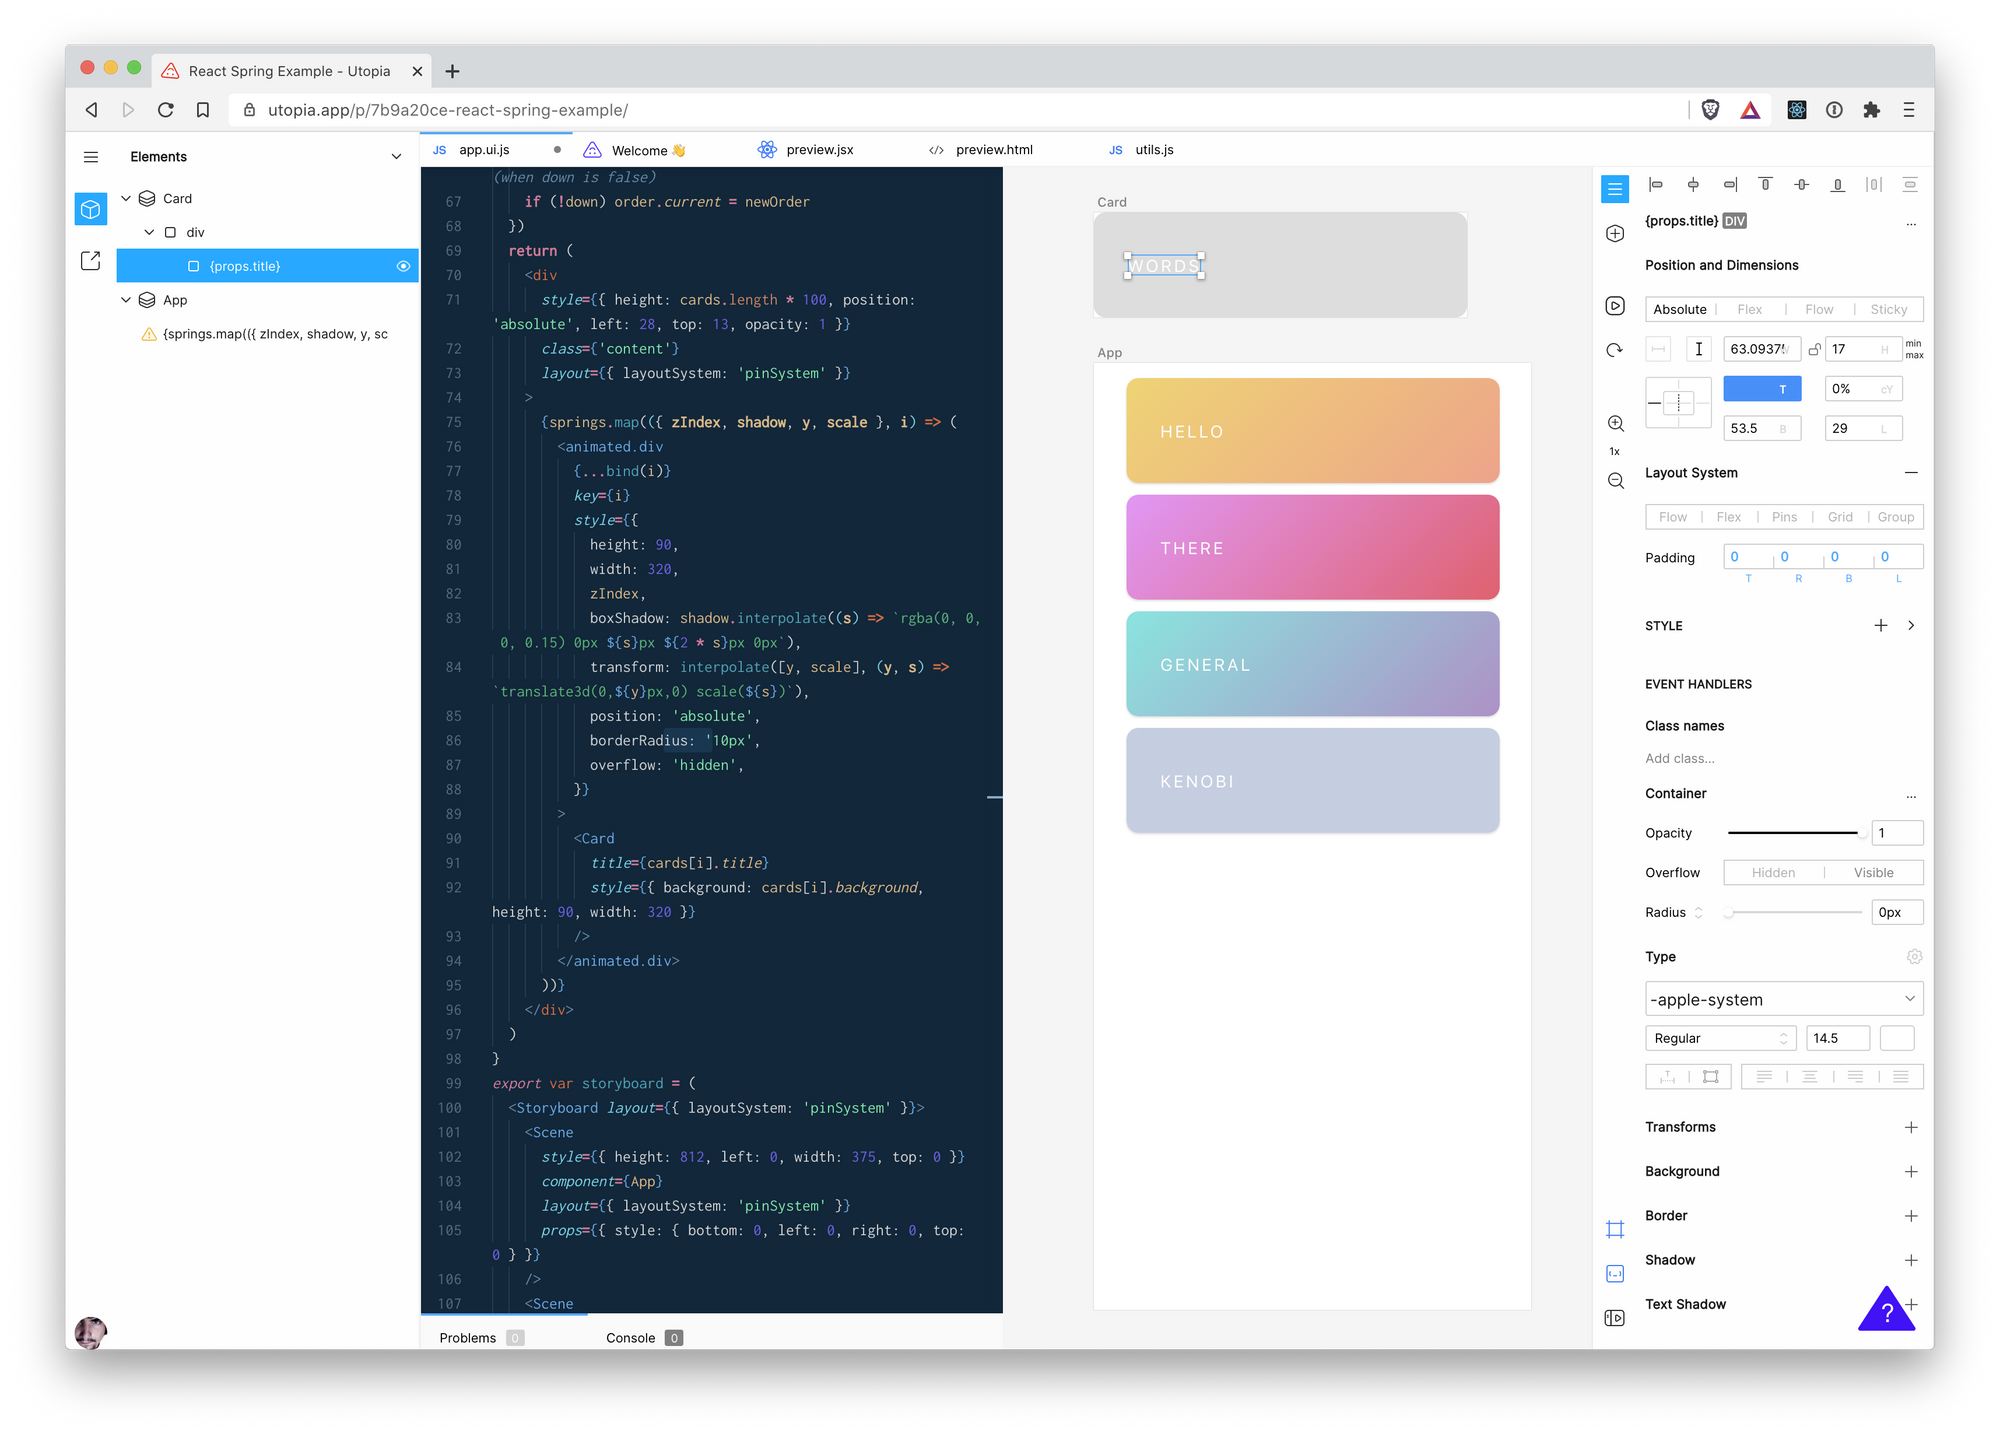 Utopia is an Open-source Real-time React Design and Coding Environment